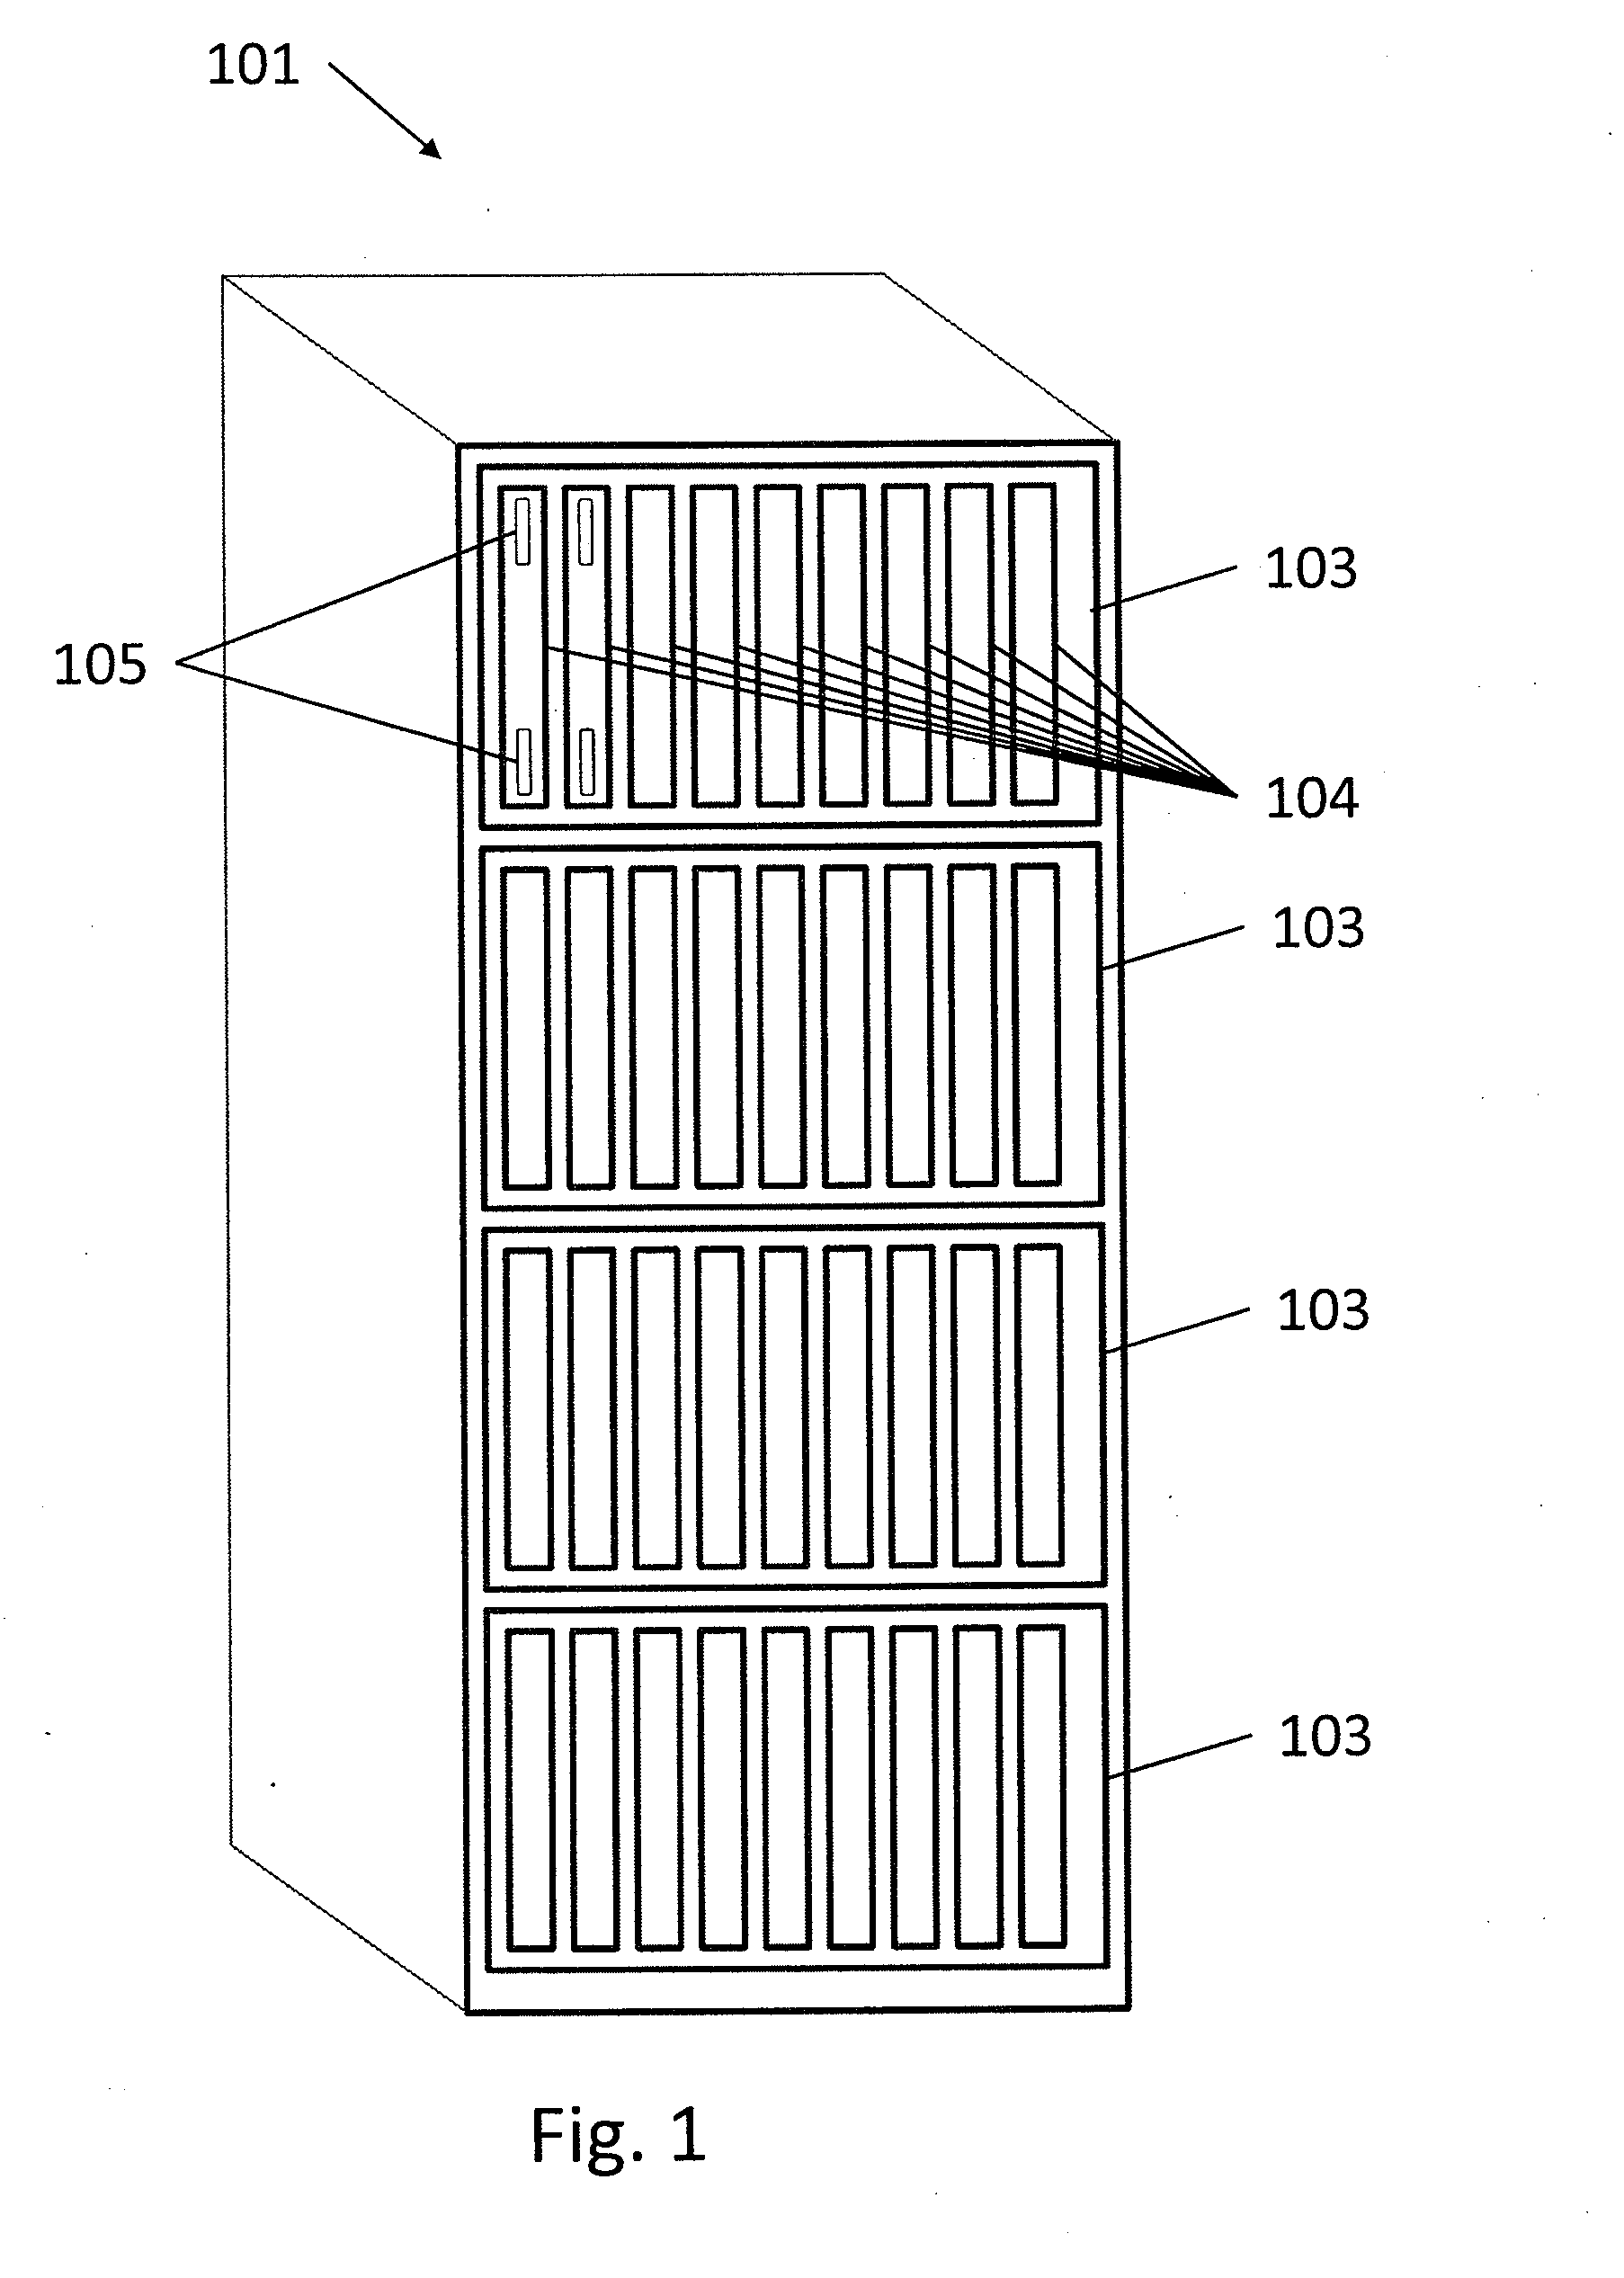 Liquid-Based Cooling System For Data Centers Having Proportional Flow Control Device